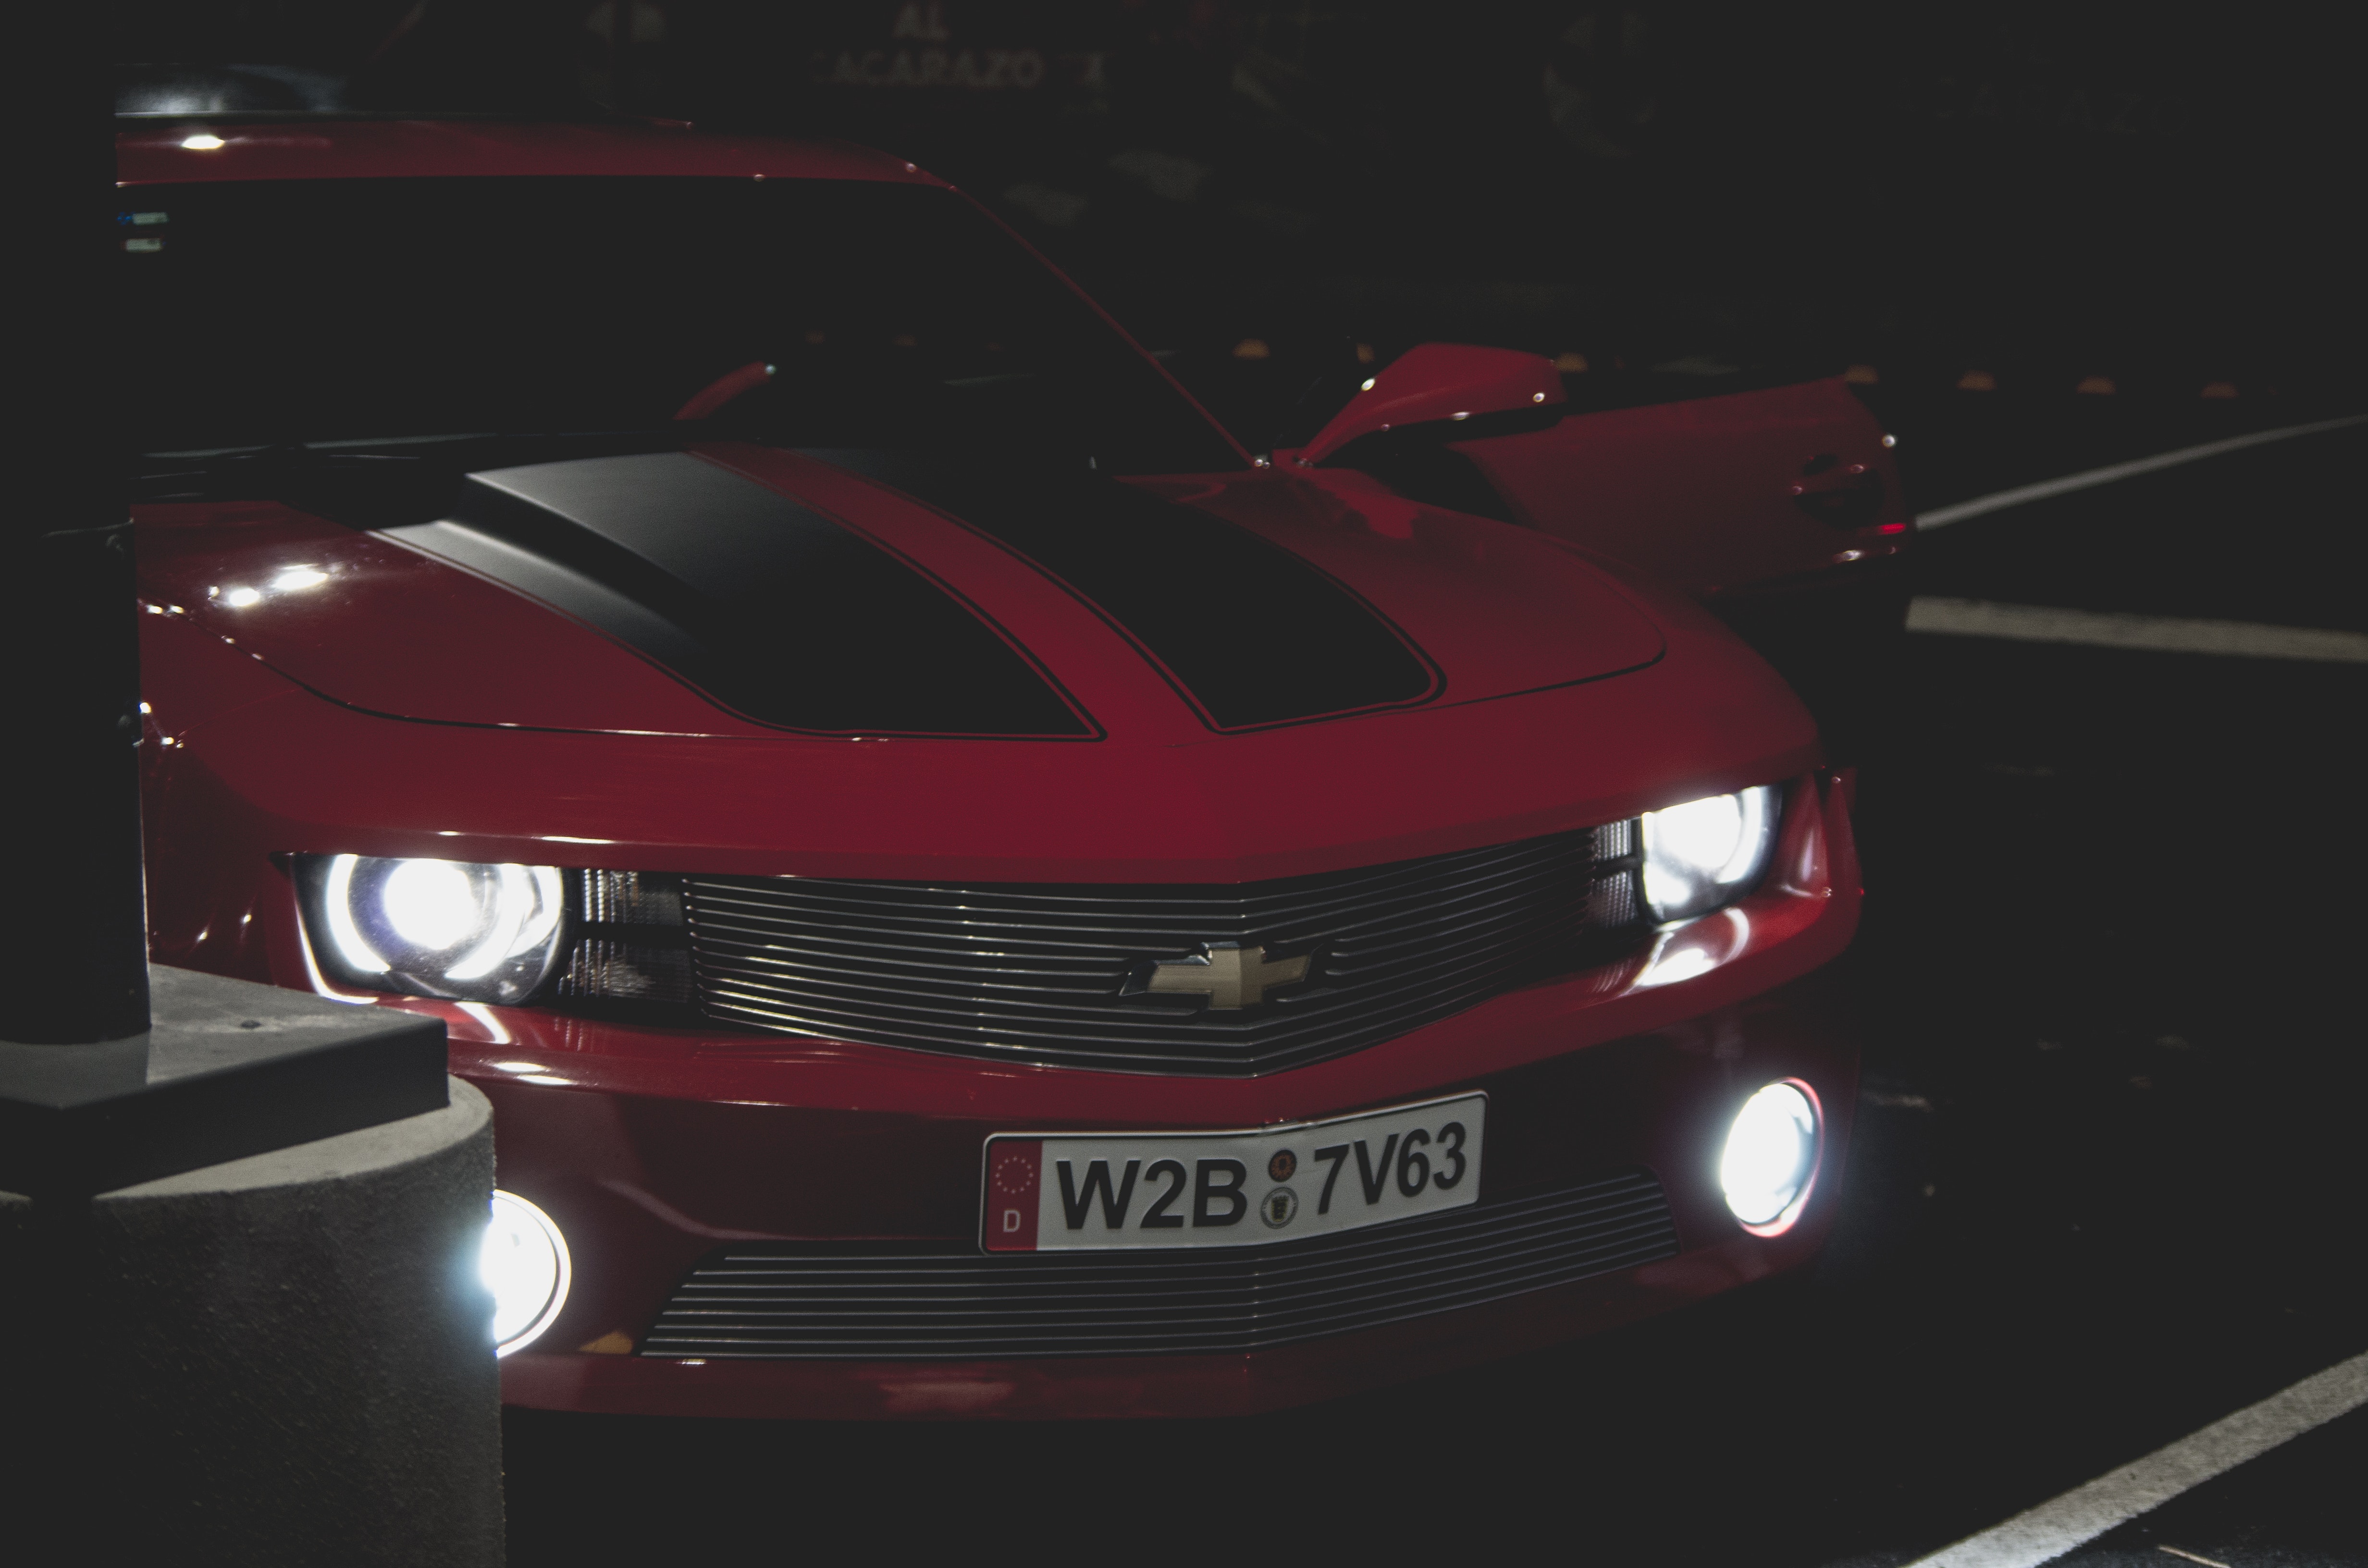 headlights, chevrolet camaro, cars, lights, front view, front bumper